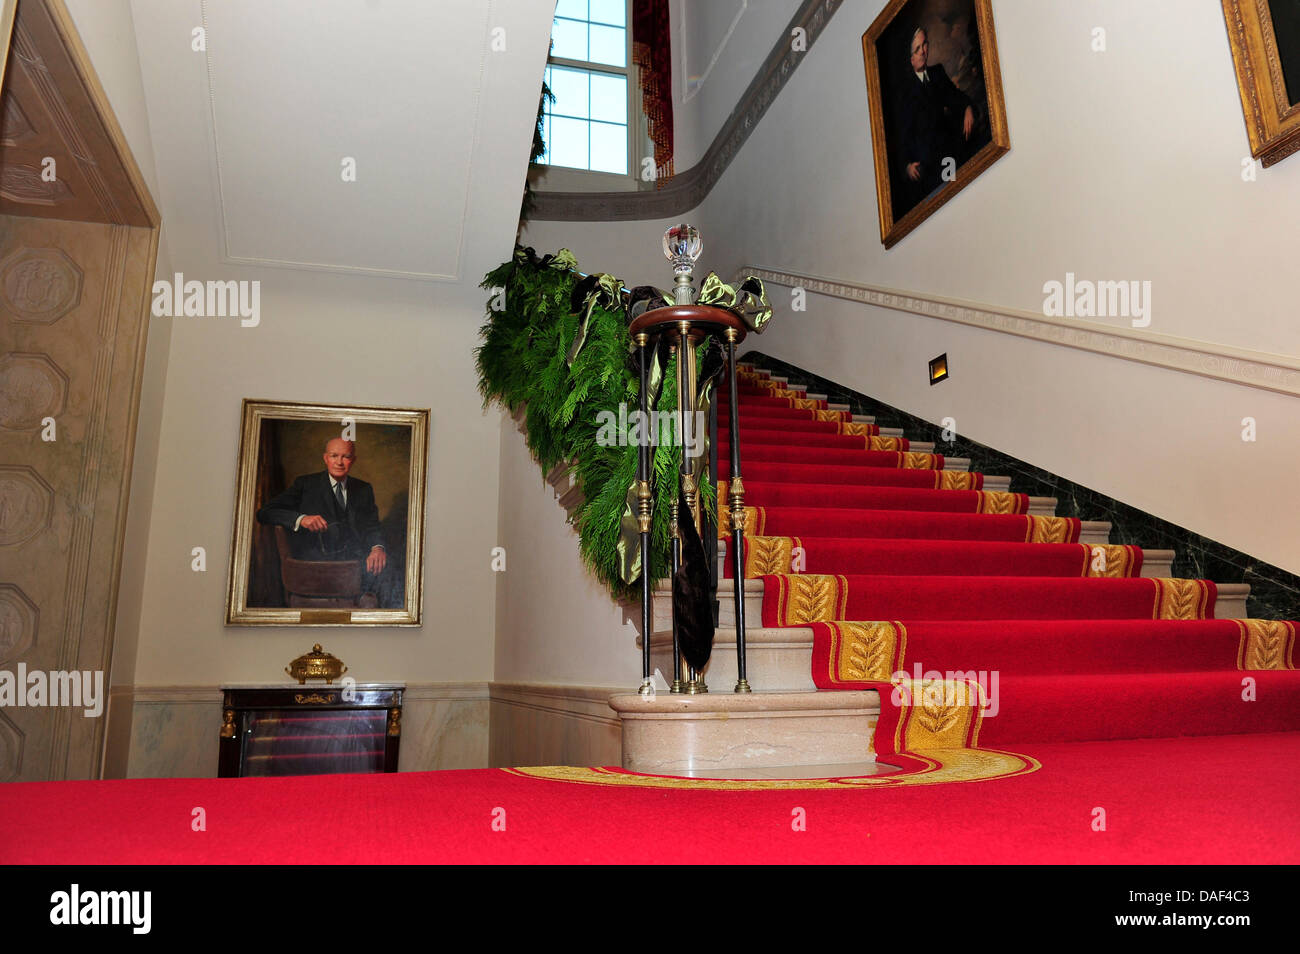 Christmas decorations on the Grand Staircase of the White House in Washington, DC. The official portraits of former United States President Dwight D. Eisenhower is at left and of former U.S. President Harry S Truman is at right. The theme for the White House Christmas 2011 is Shine, Give, Share - celebrating the countless ways we can lift up those around us, put our best self forwa Stock Photo